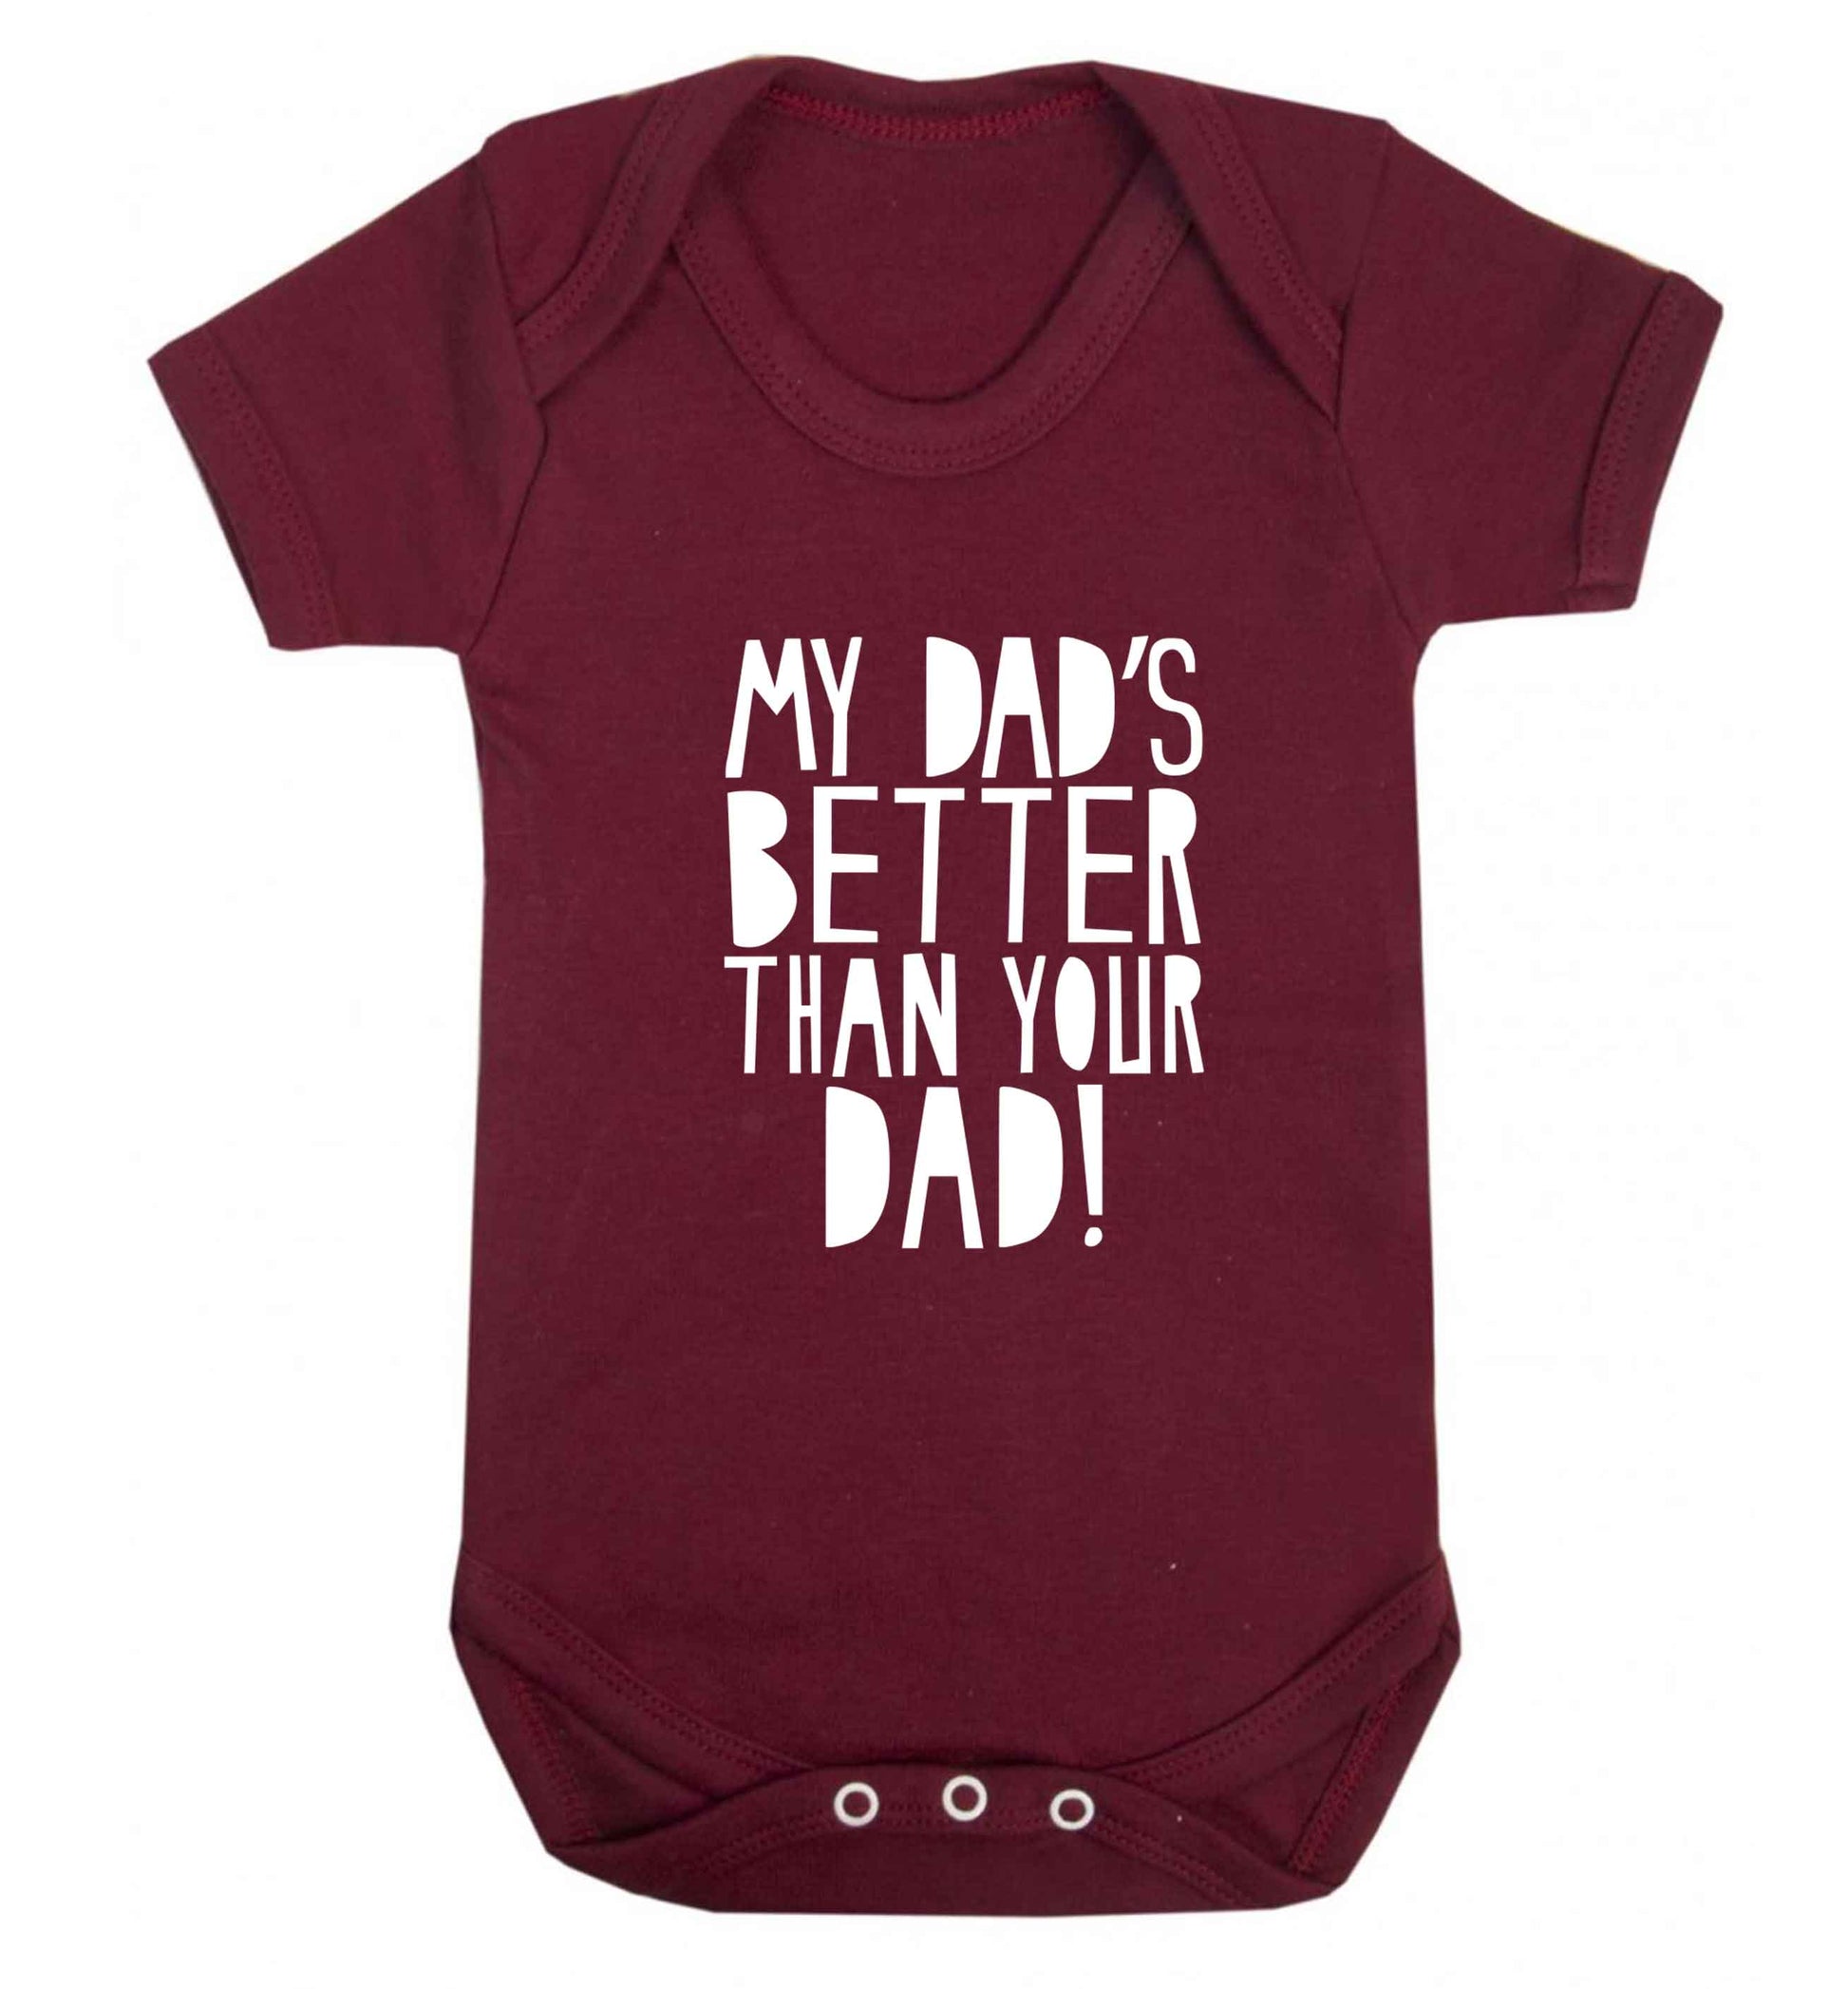 My dad's better than your dad! baby vest maroon 18-24 months